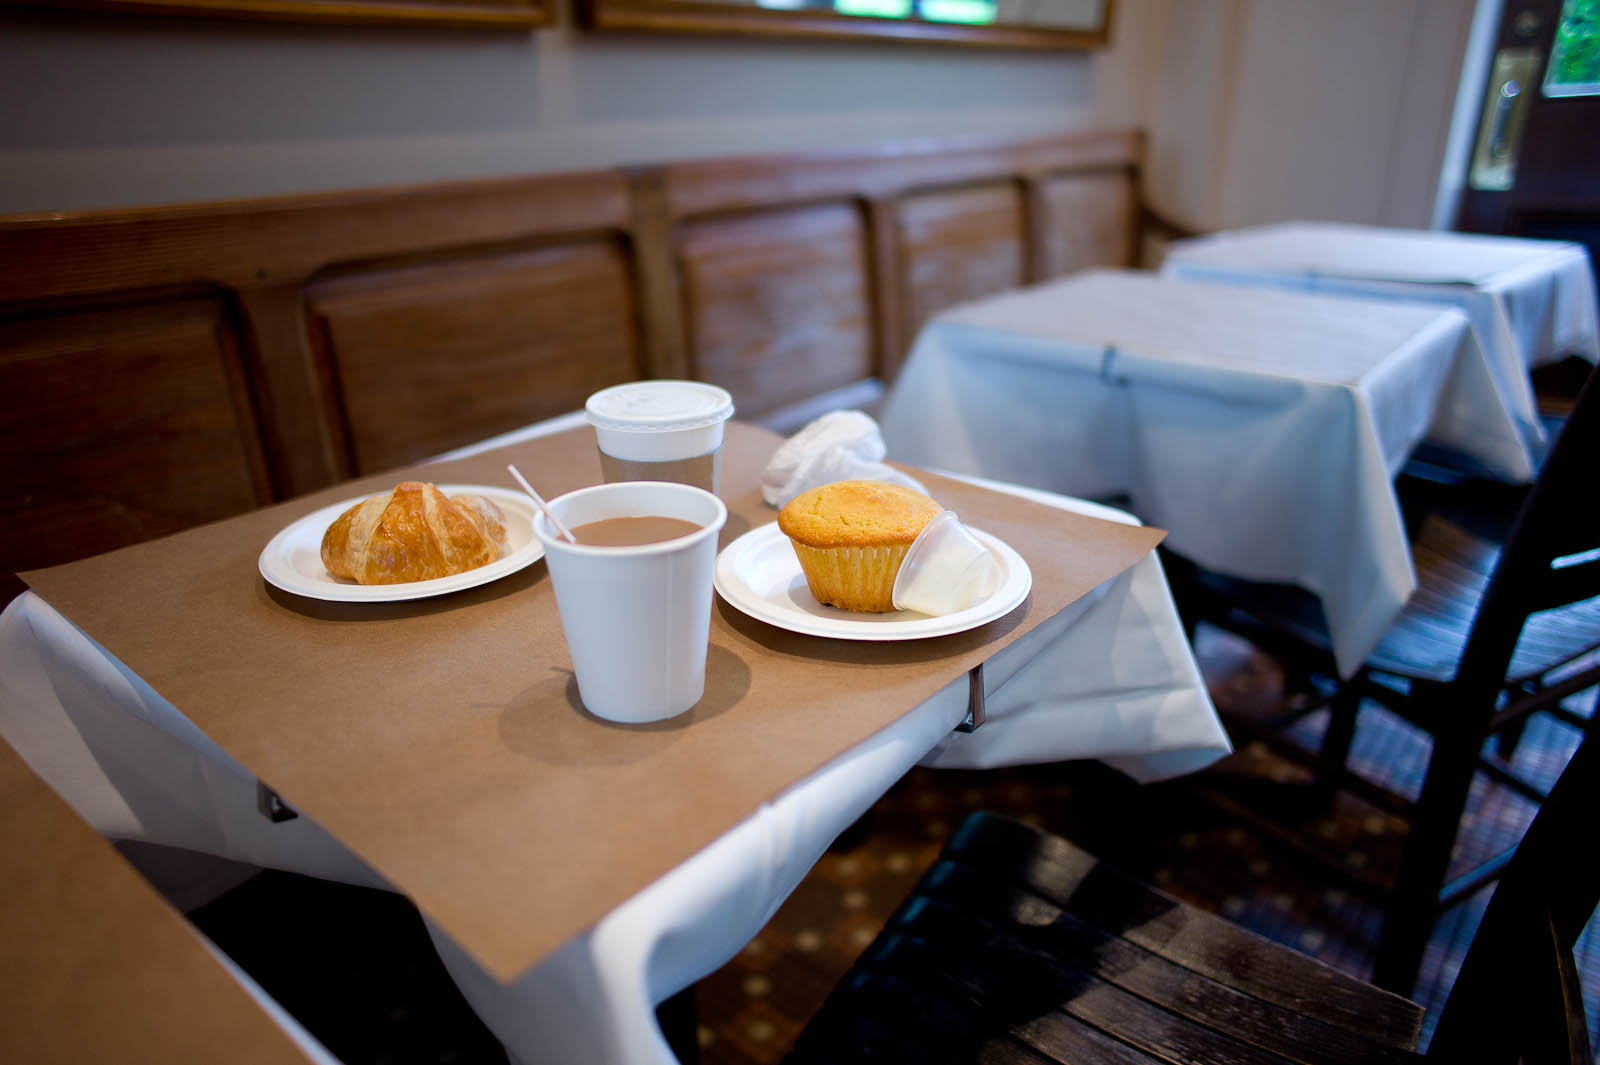 Croissant, Corn Muffin, and Coffee